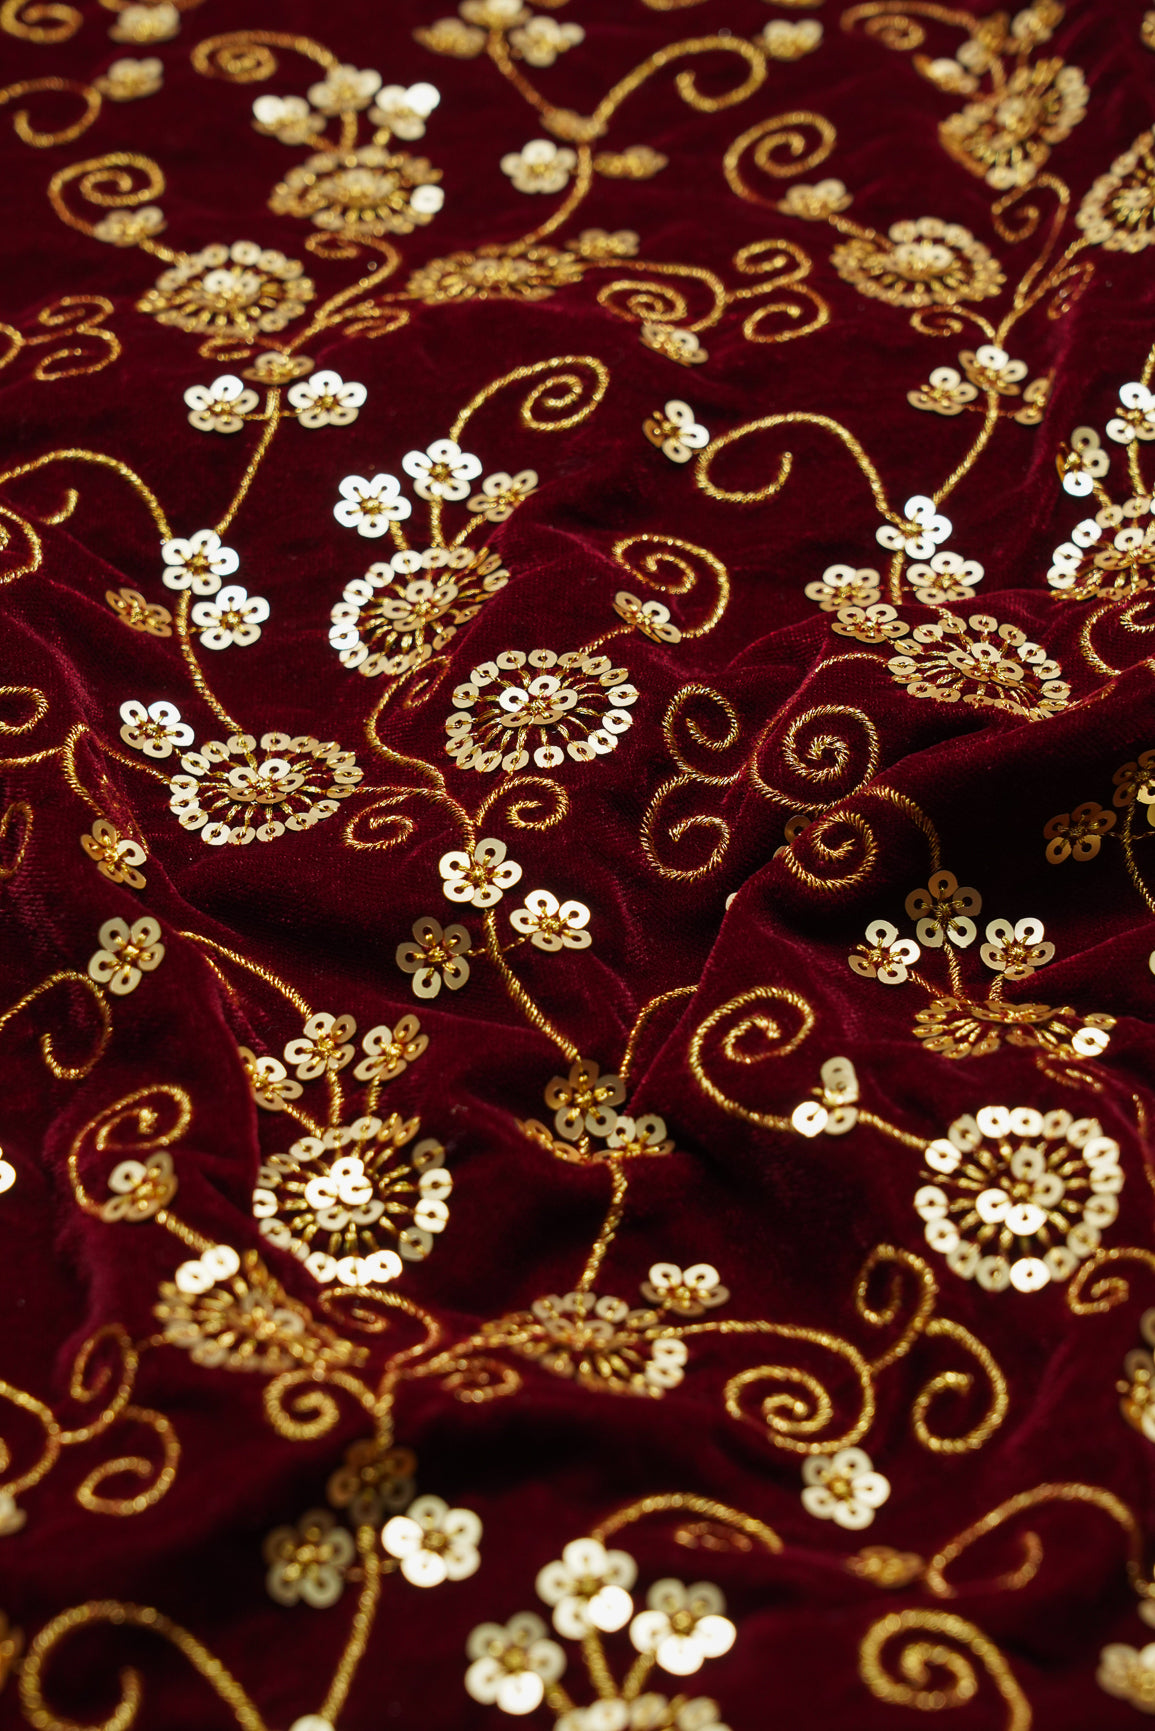 Gold Sequins With Gold Thread Embroidery On Maroon Velvet